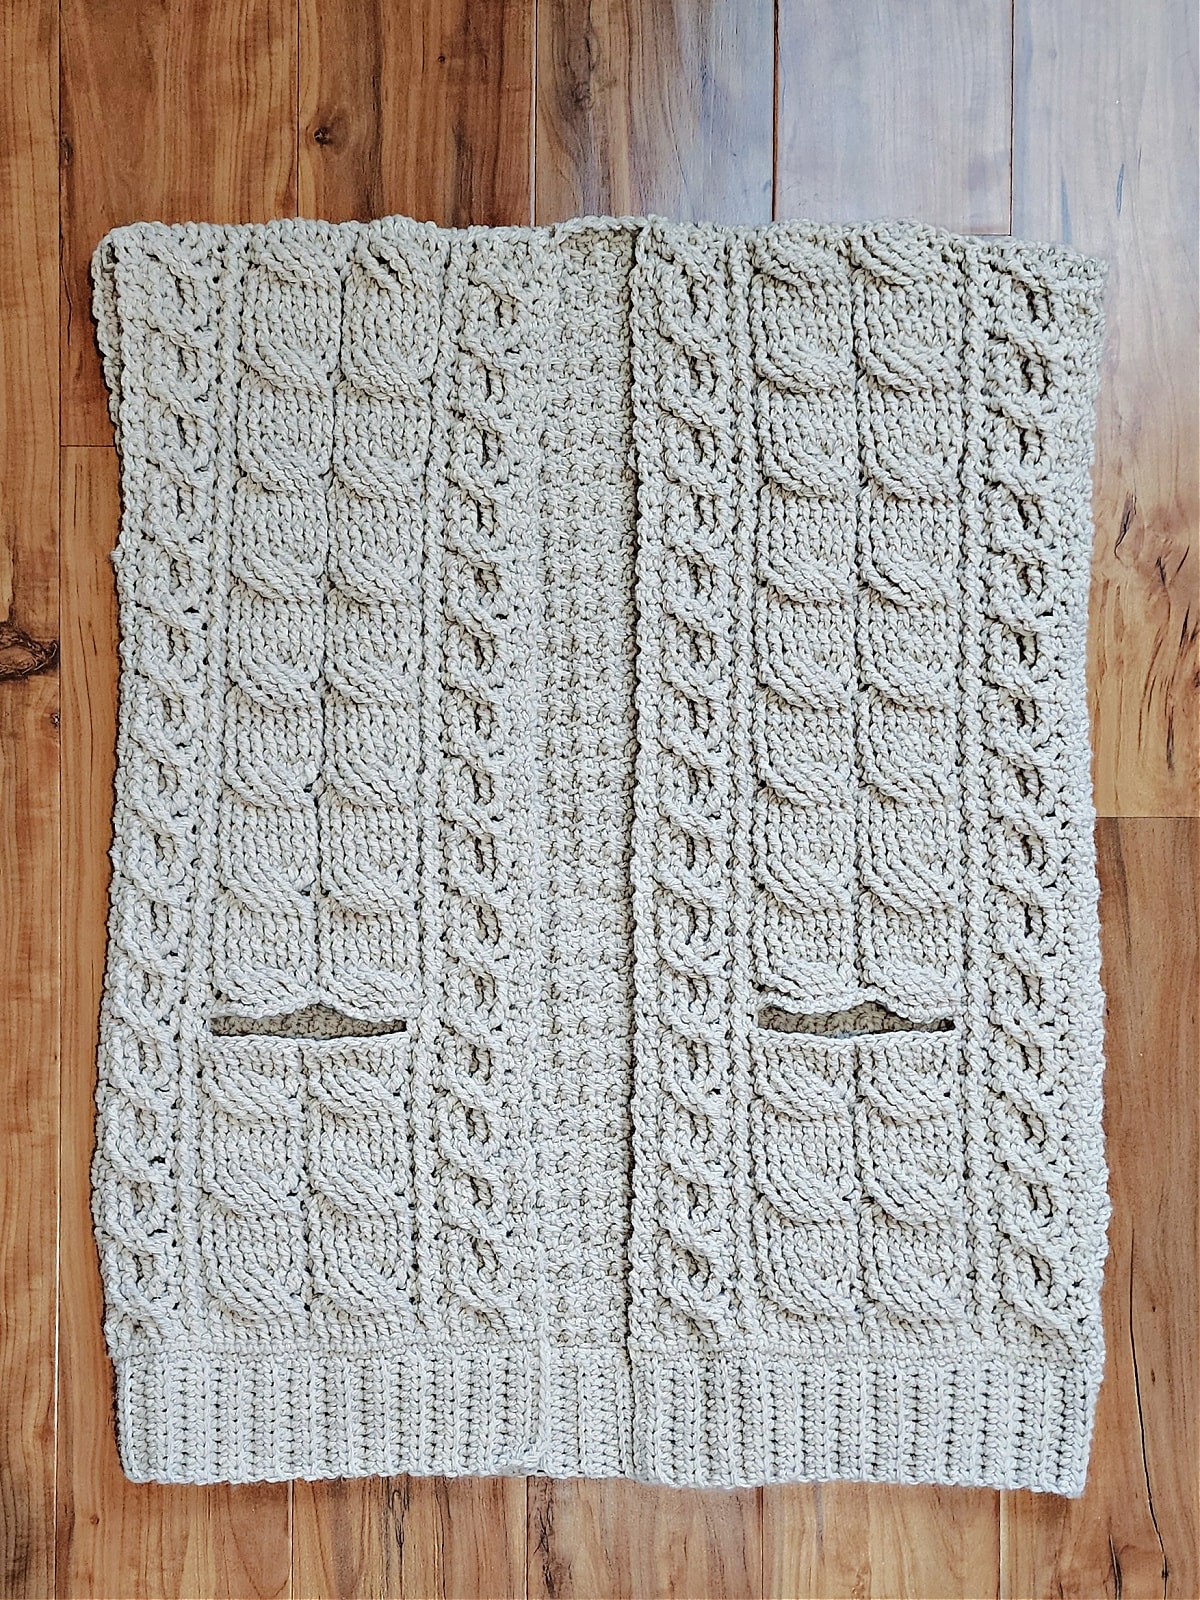 Body of crochet cable cardigan with shoulders seamed laying on wood floor.